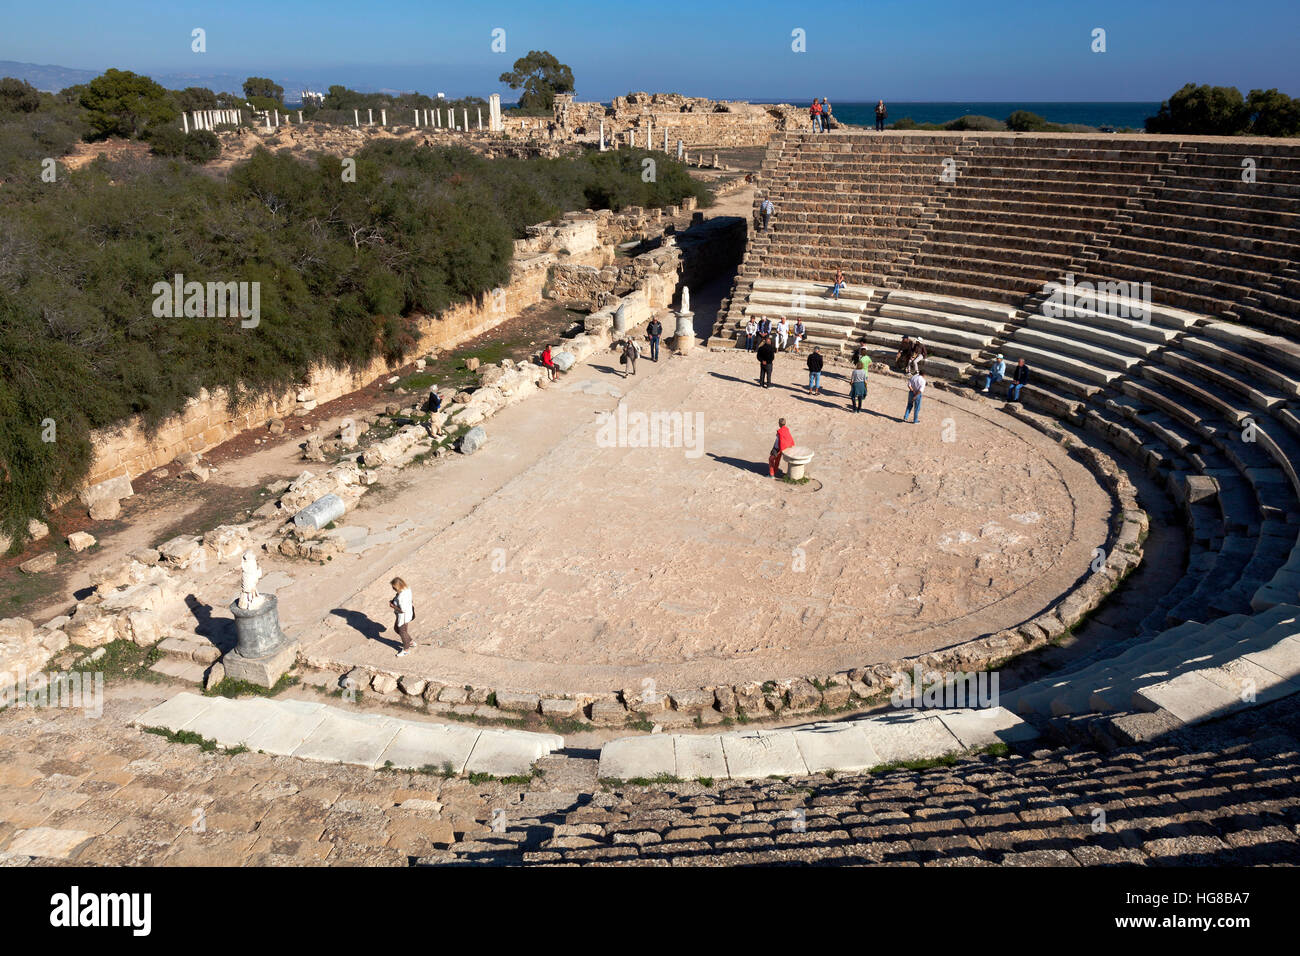 Amphitheater, archeological site, ancient city of Salamis, Farmagusta, Northern Cyprus, Cyprus Stock Photo